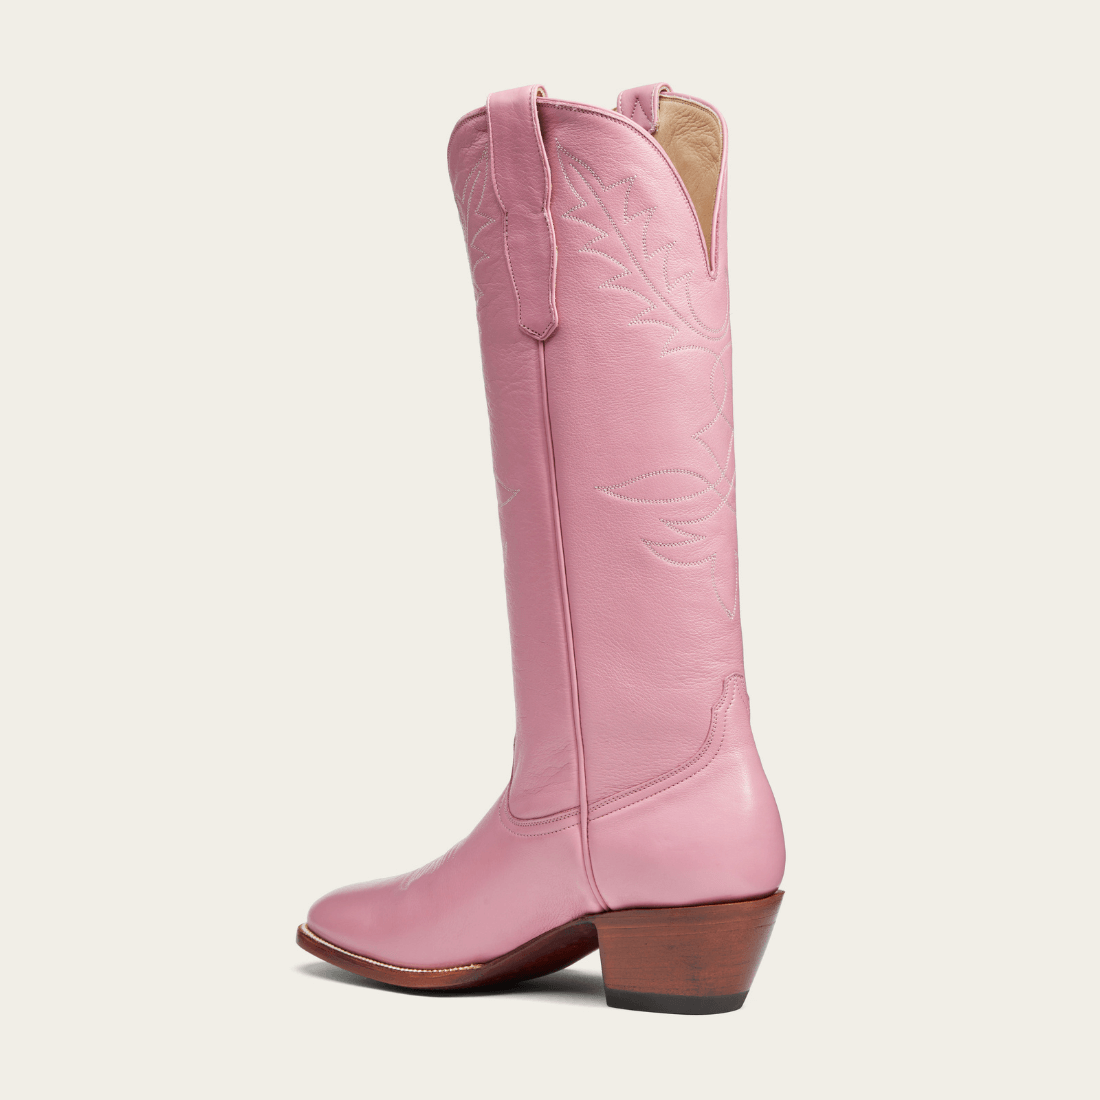 CITY Boots Lover's Lane Women's Pink Cowboy Boots - CITY Boots